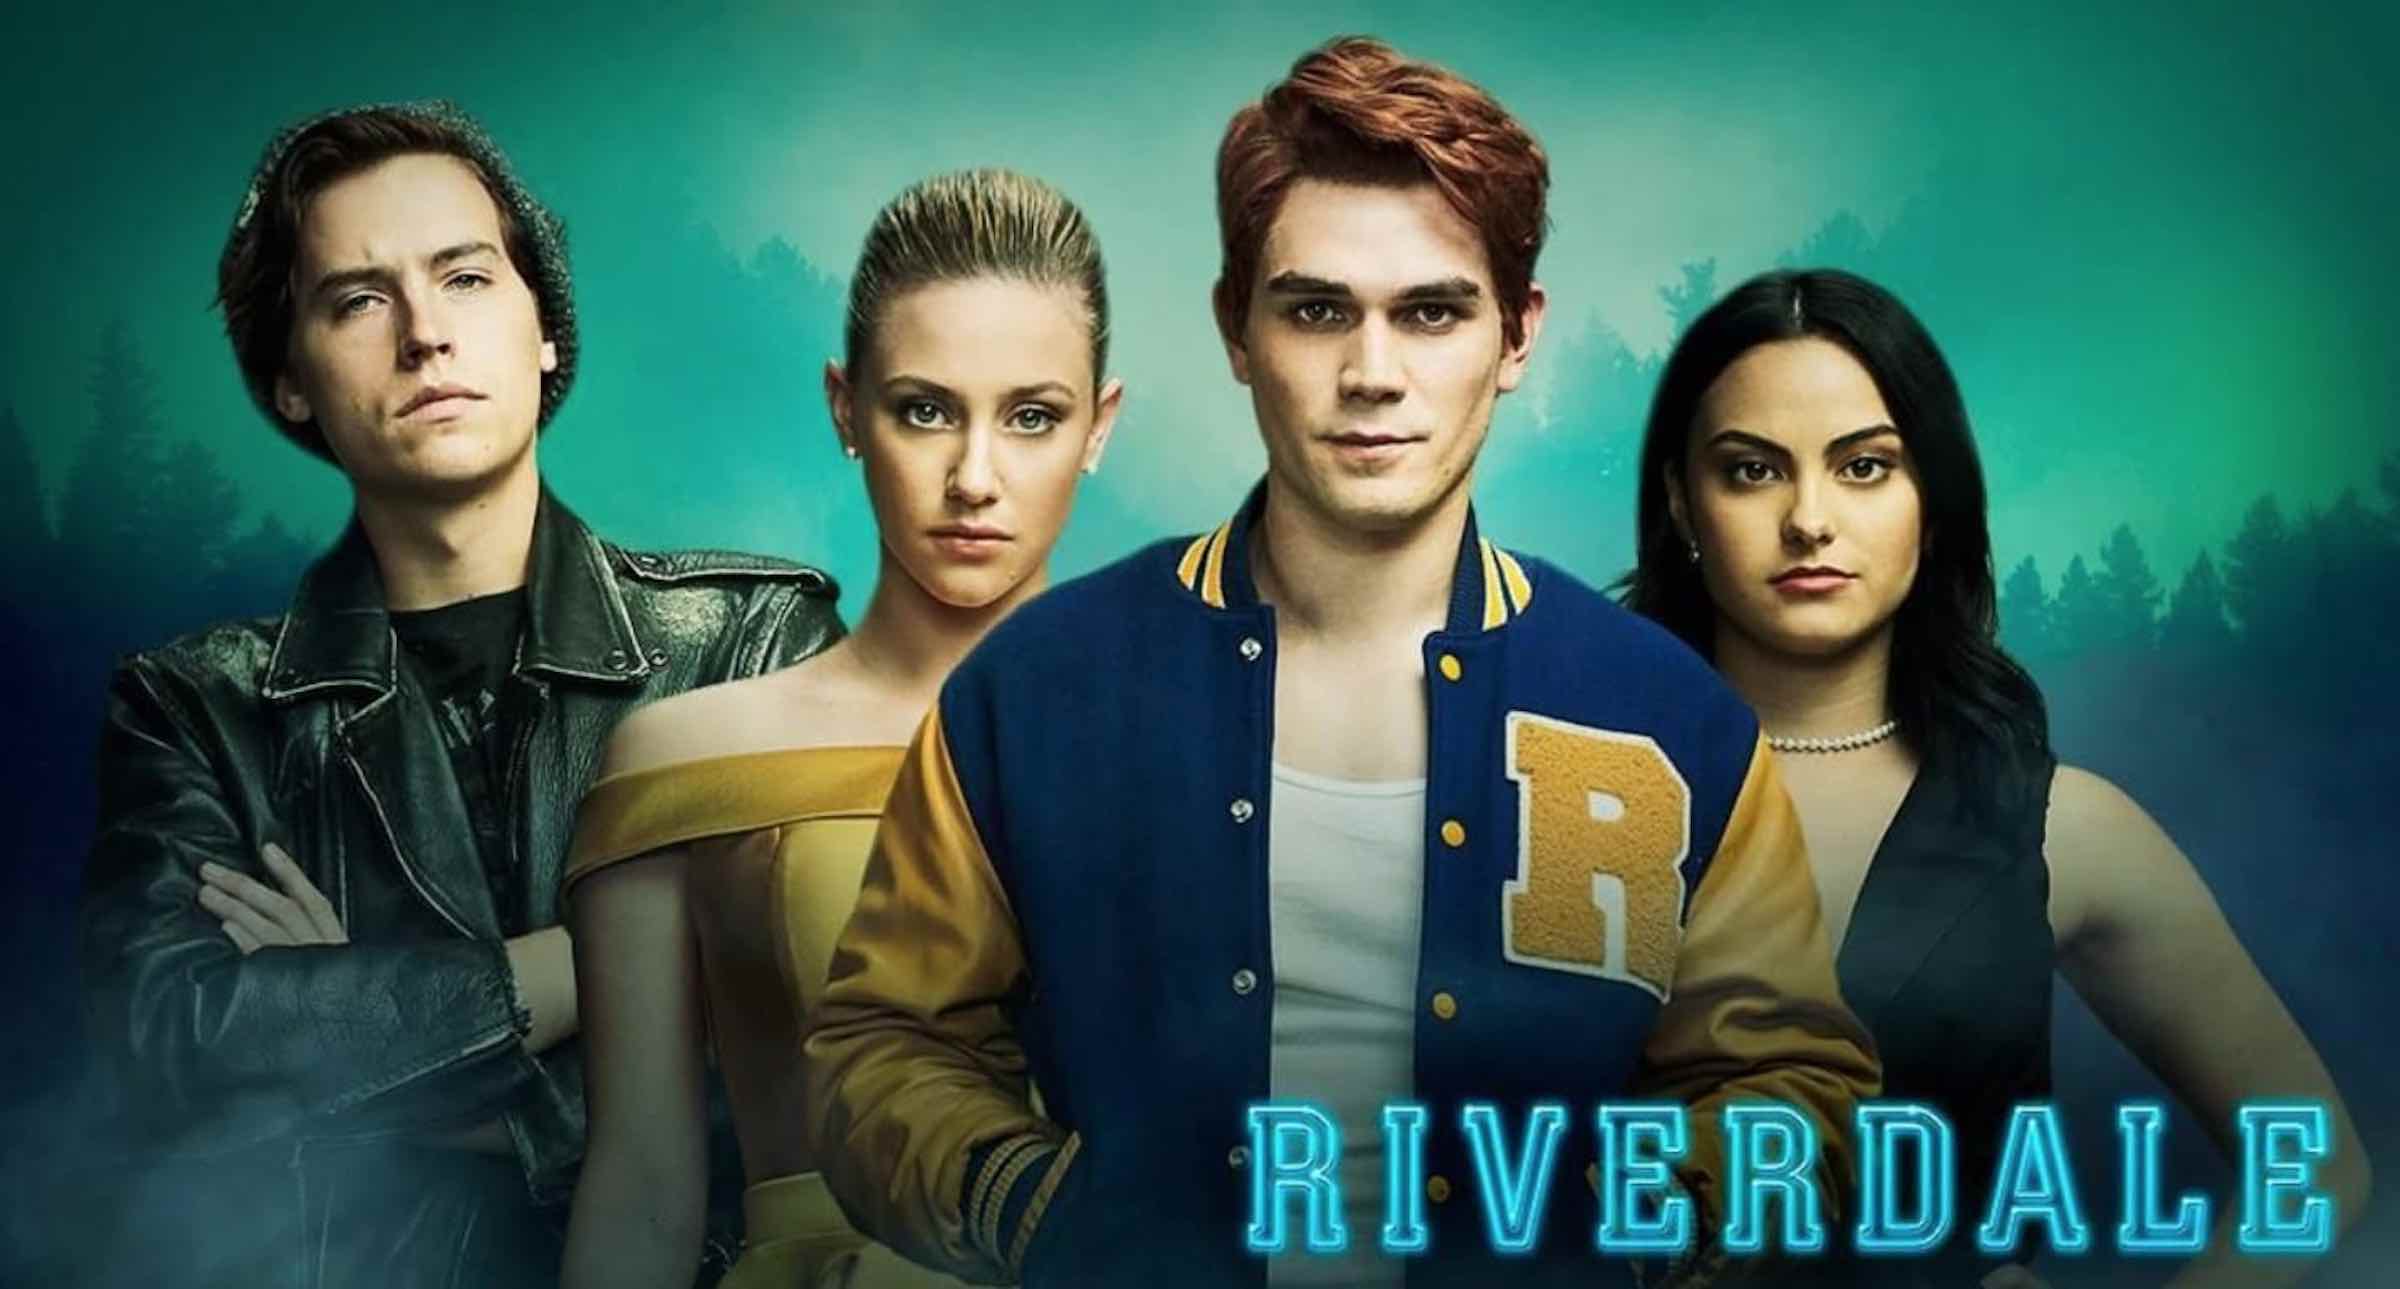 Prepare to laugh – but also question what the 'Riverdale' writers must’ve been taking . . . Here are all the best 'Riverdale' quotes.